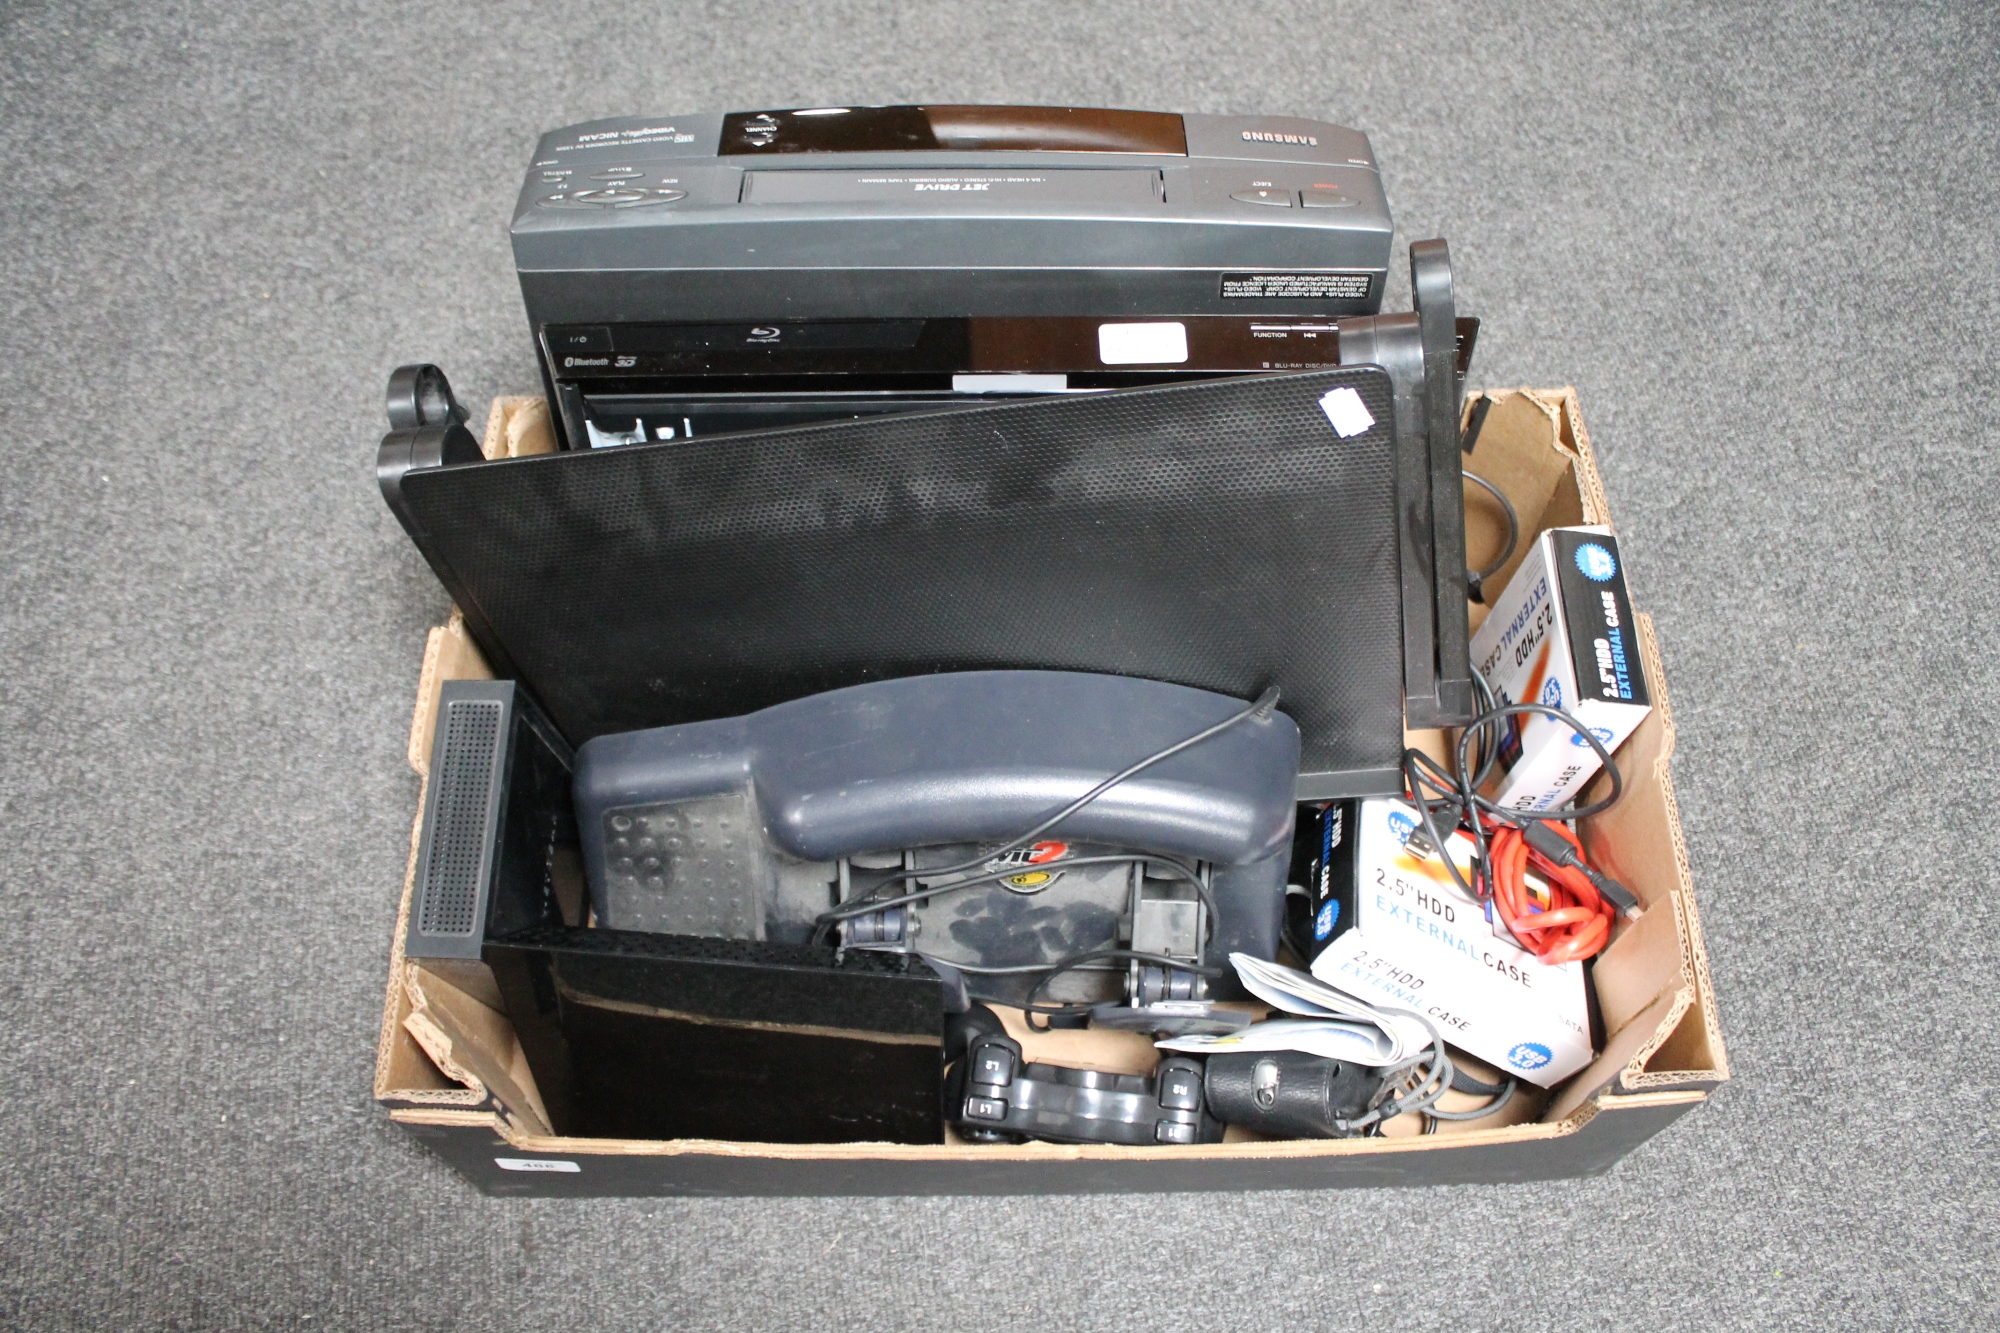 A box of Samsung VCR, Sony blu-ray player with remote, routers, third party playstation controller,